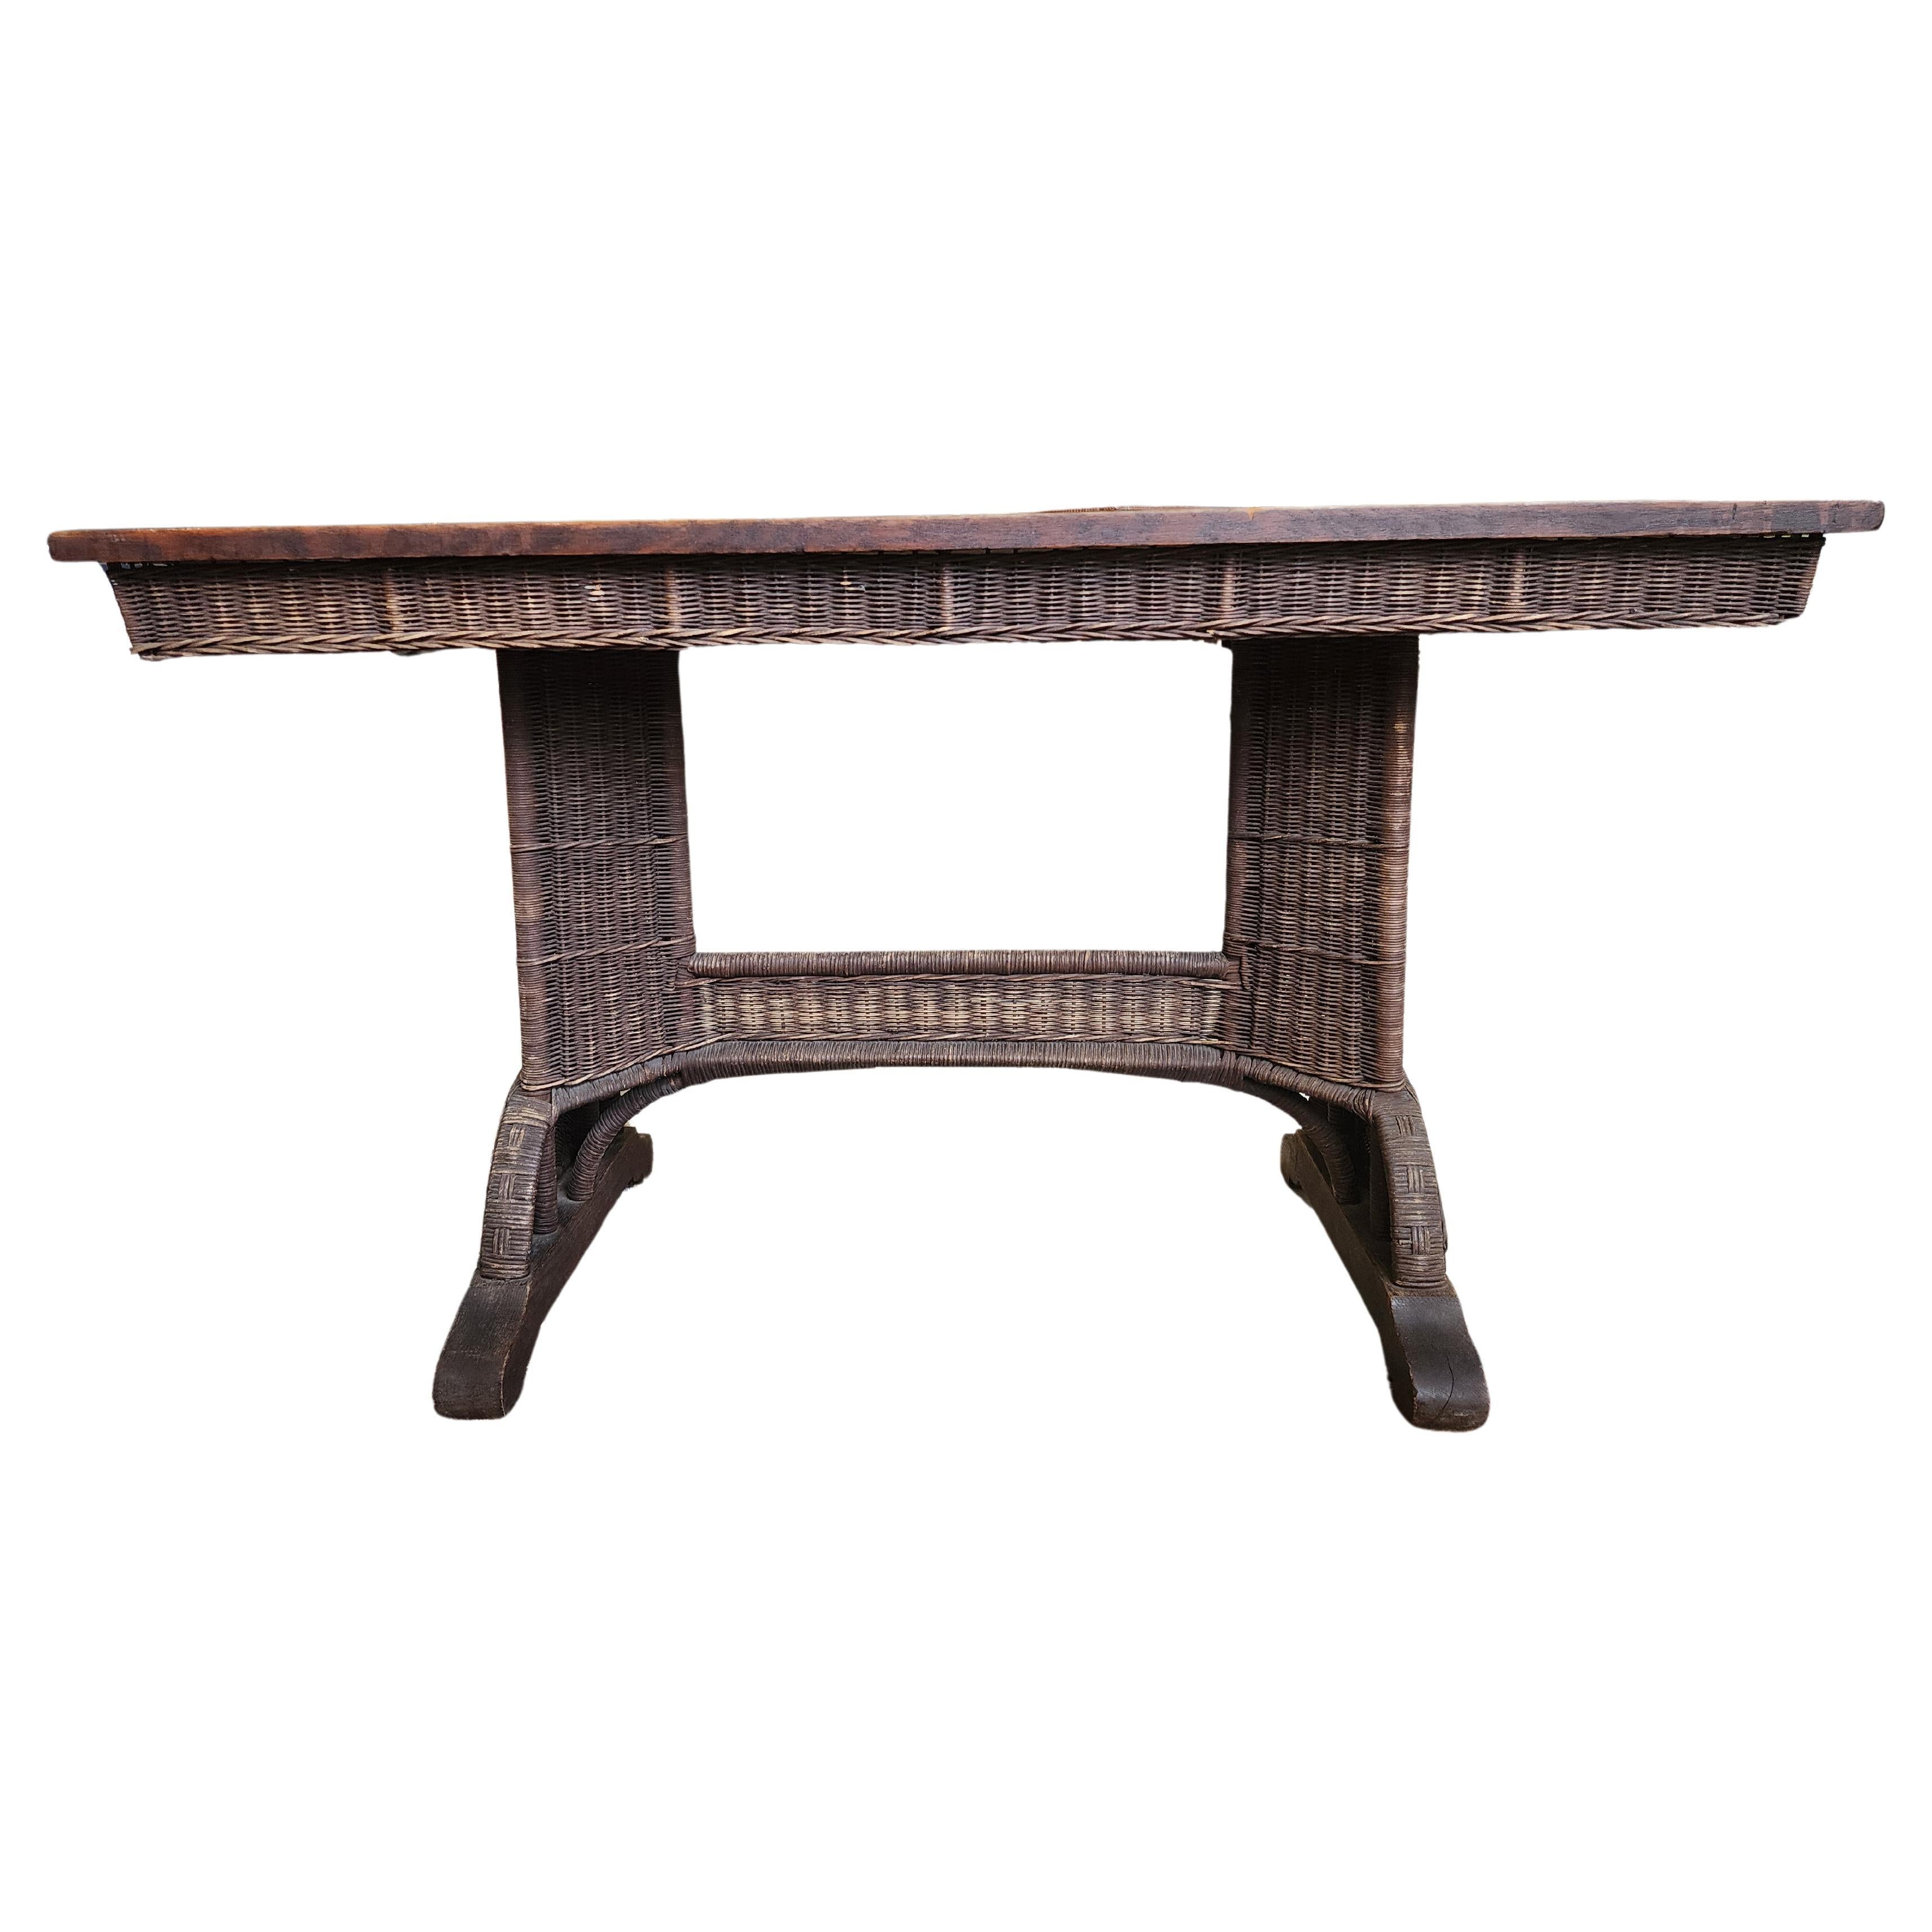 Heywood Wakefield library table. With quarter sawn, oak top and woven wicker pedestal legs, apron, and stretcher. This wicker table drew on the Aesthetic Movement and Japanese influences; simpler designs arose in the wake of the Arts and Crafts